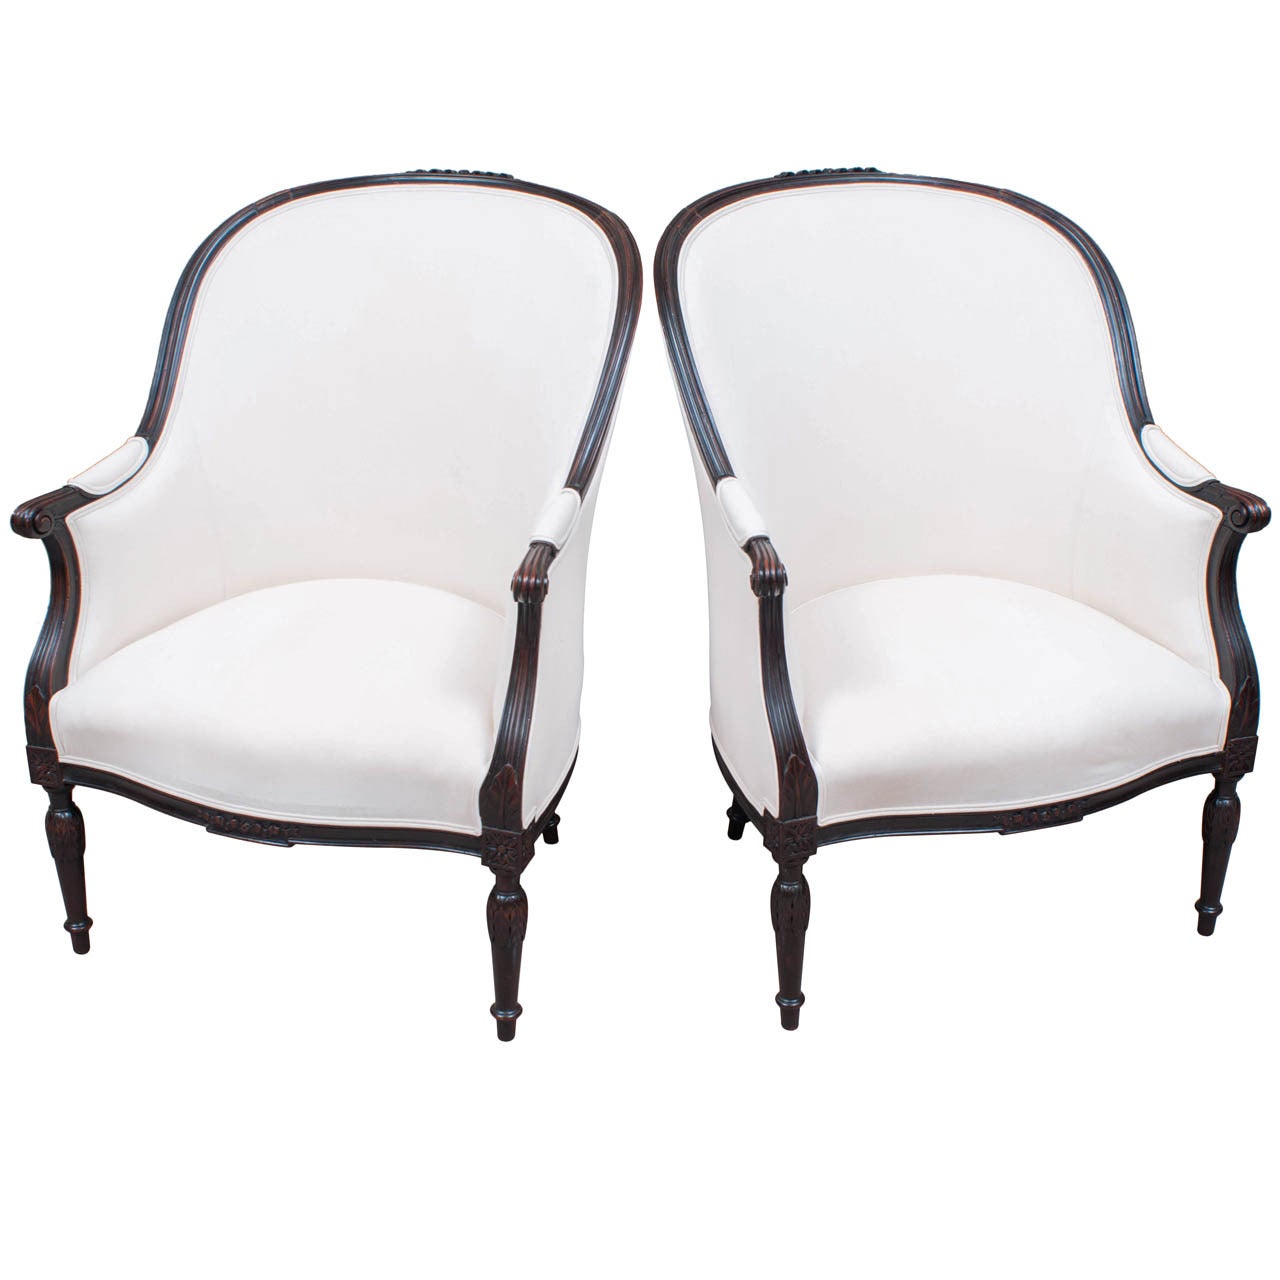 Pair of Edwardian Barrel Chairs